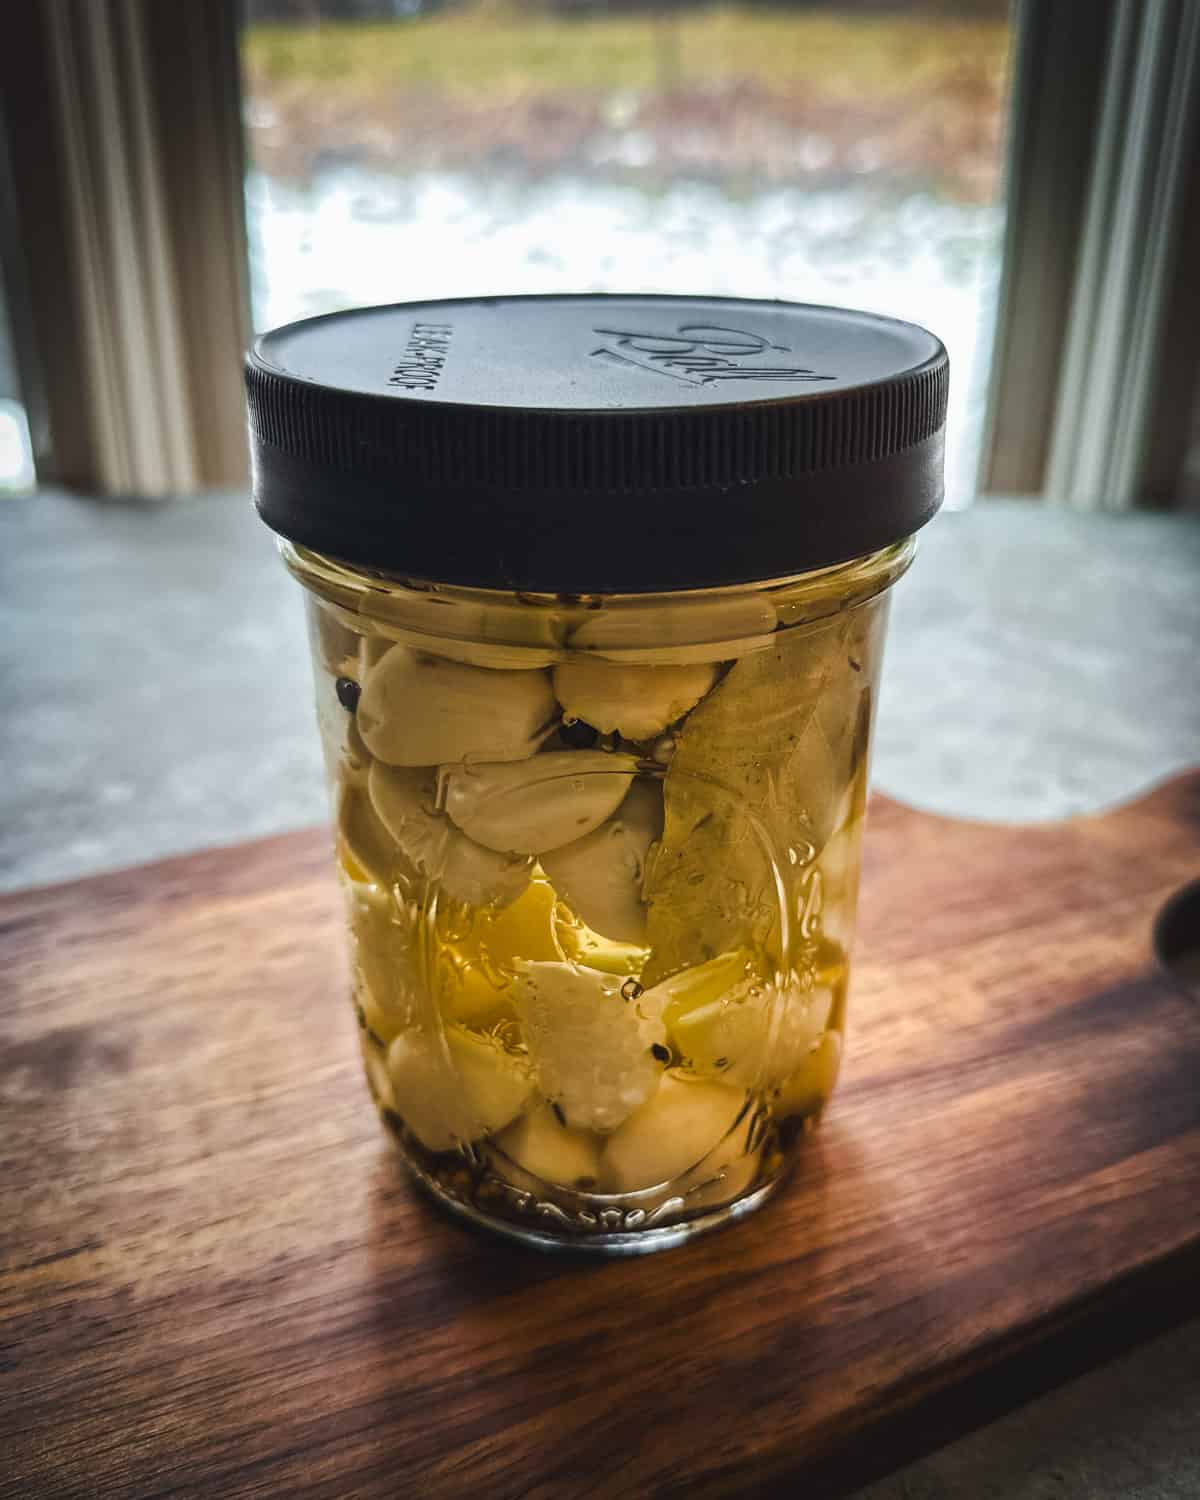 A jar of garlic in pickling brine, with a black cap on it, on a wood cutting board, with a window in the background. 